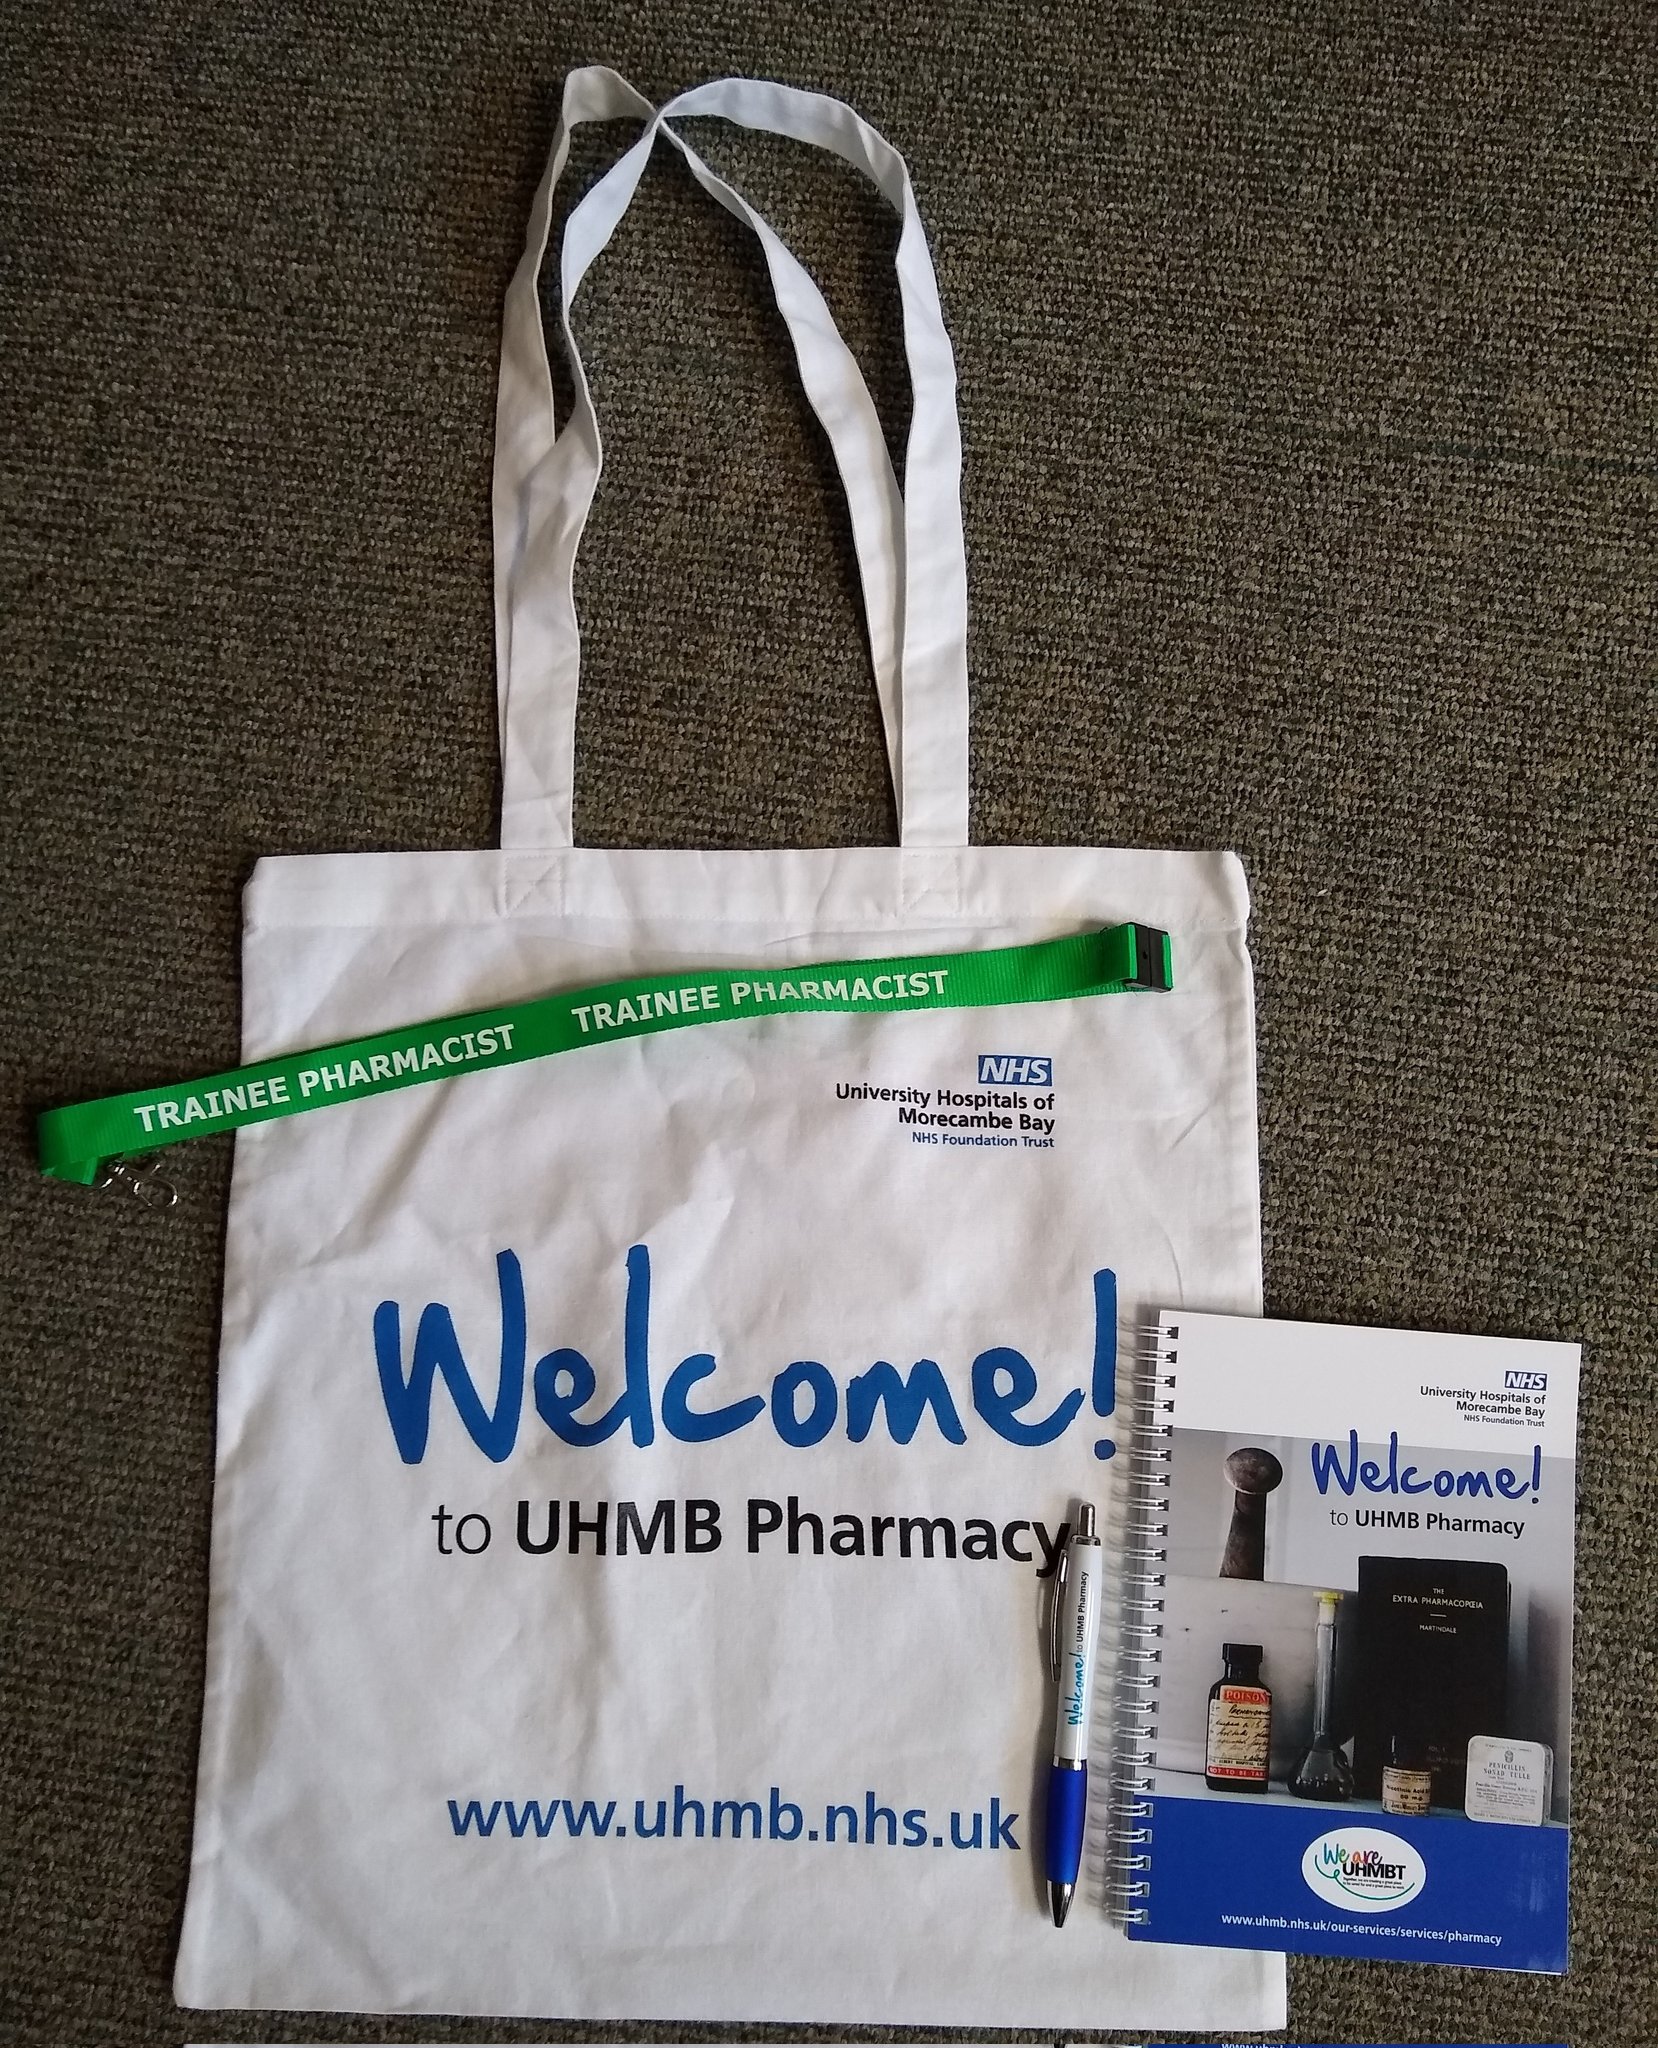 Laura Healey on Twitter: "Our brand new welcome packs @UhmbPharmacy ready  for our new trainee pharmacists starting on Monday. Thanks to  @BANGDesignLtd and very excited to hand them out to the first